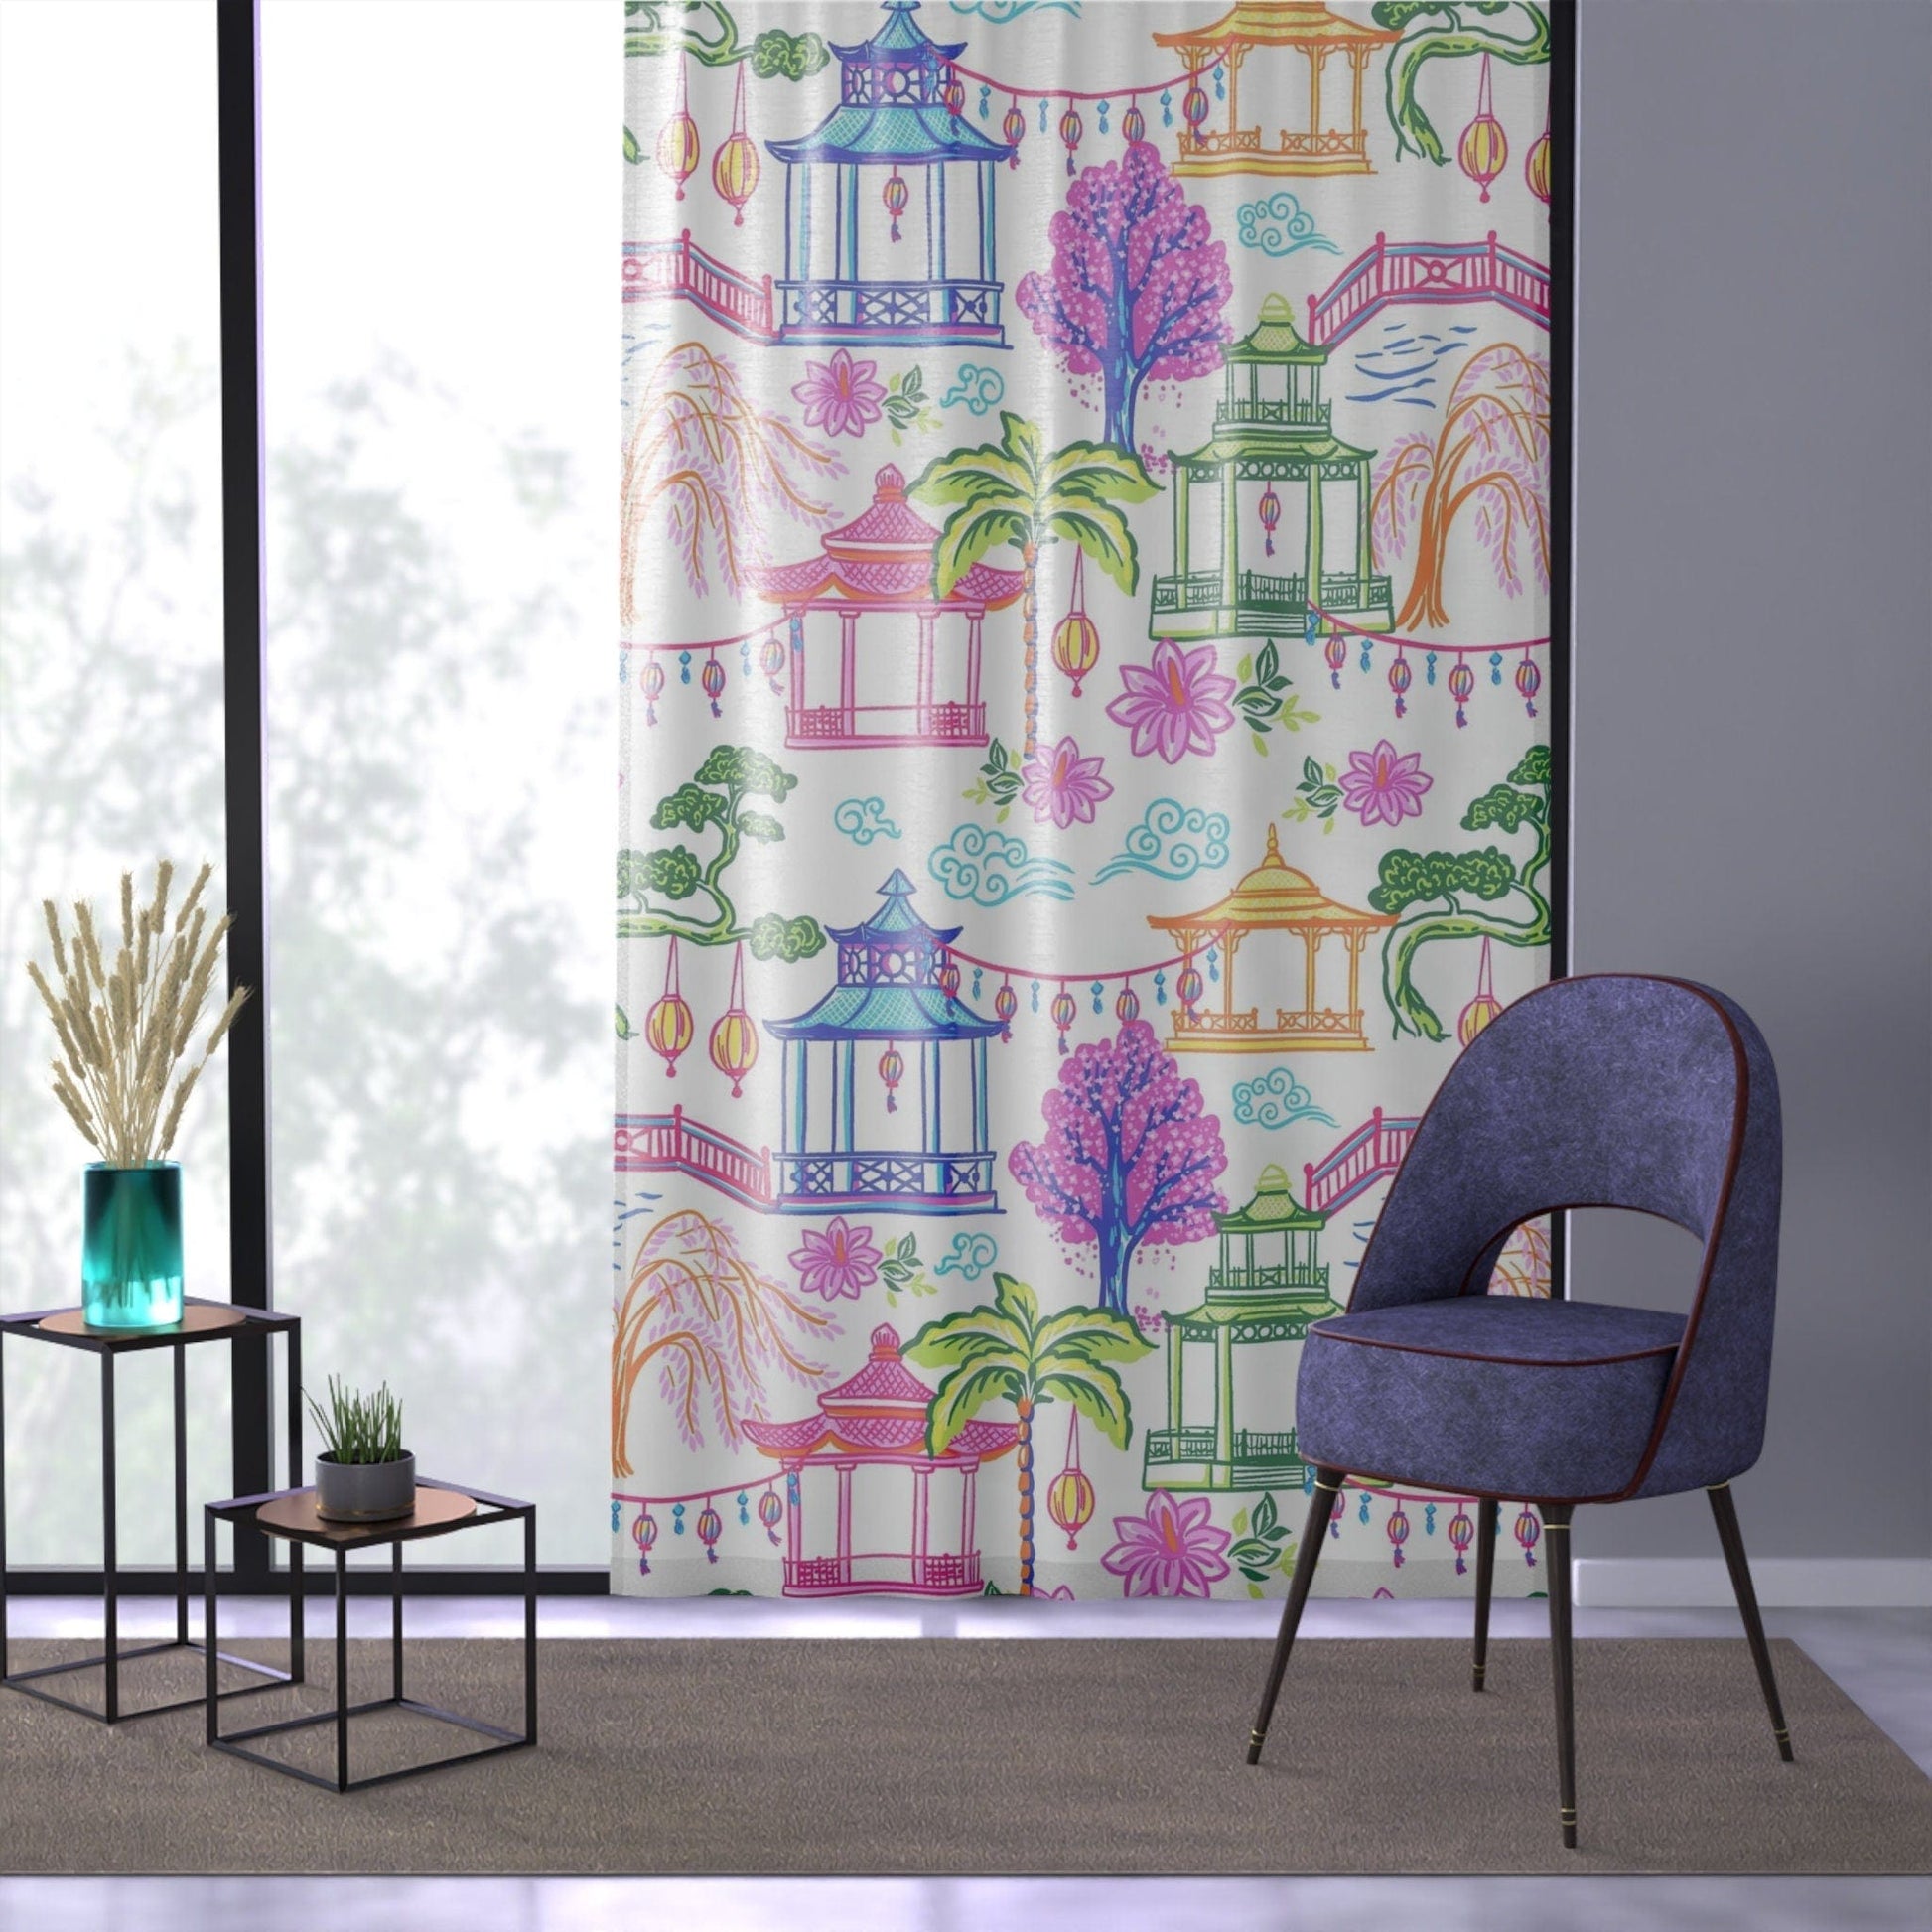 Kate McEnroe New York Tropical Chinoiserie Pagoda Garden Curtains in Blue, Pink, Green, Yellow by Kate McEnroe - KM13859923 Window Curtains